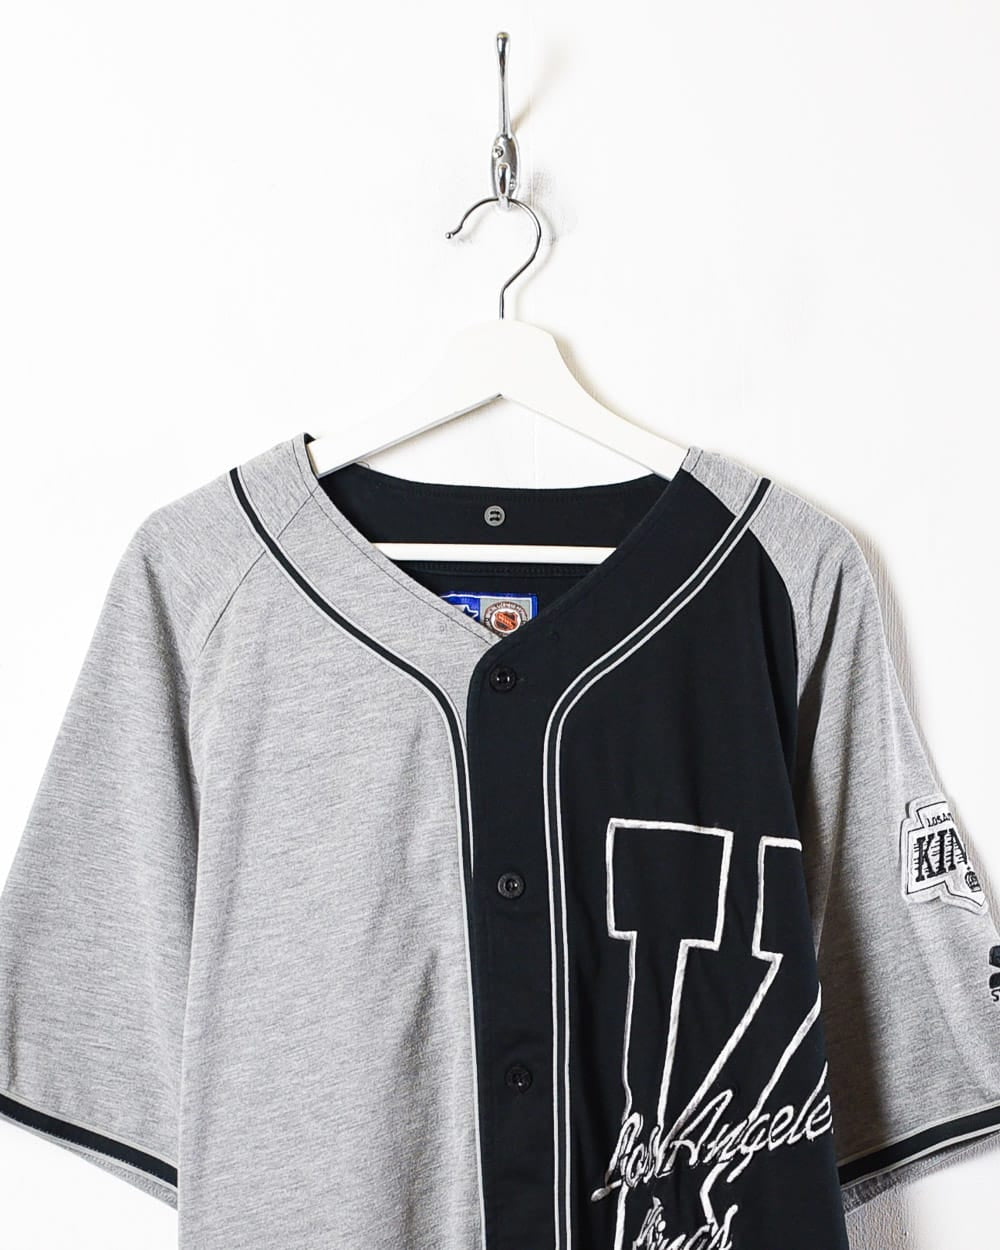 Grey Starter Los Anglers Kings Jersey - X-Large